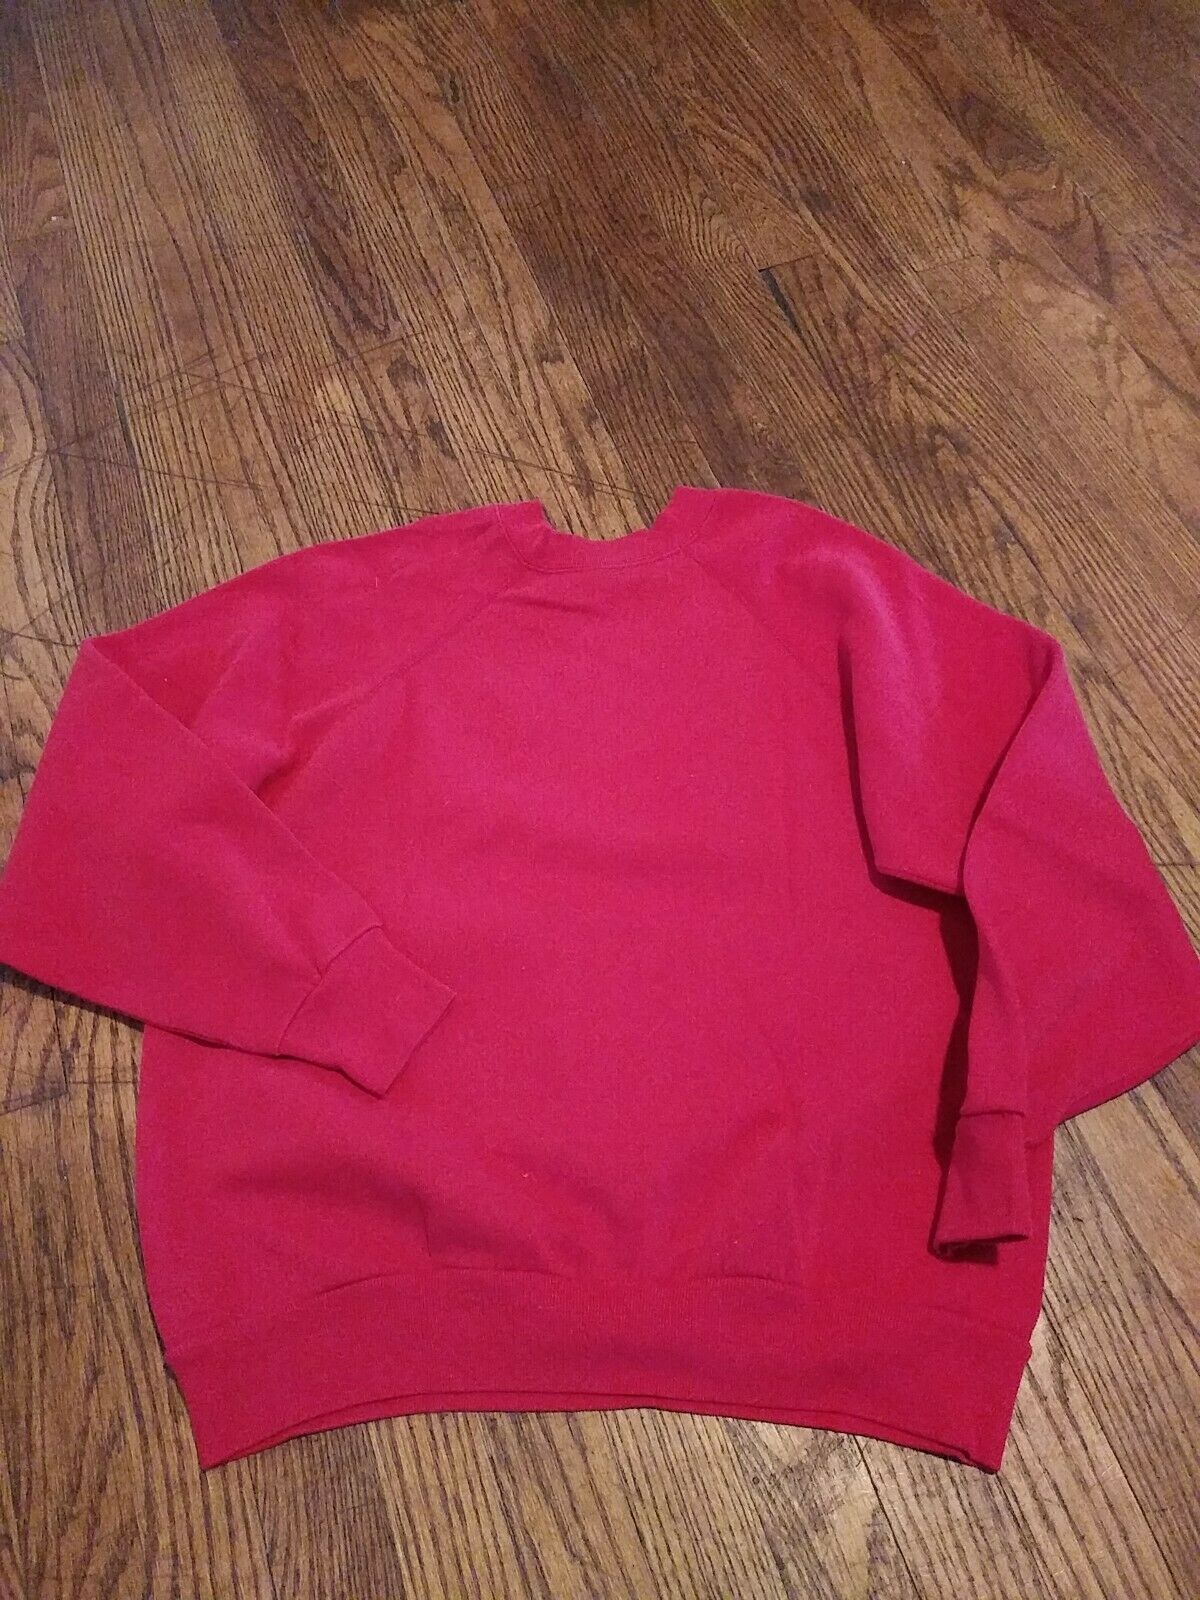 Vintage 90s Tultex Blank Red 50/50 Sweat Shirt